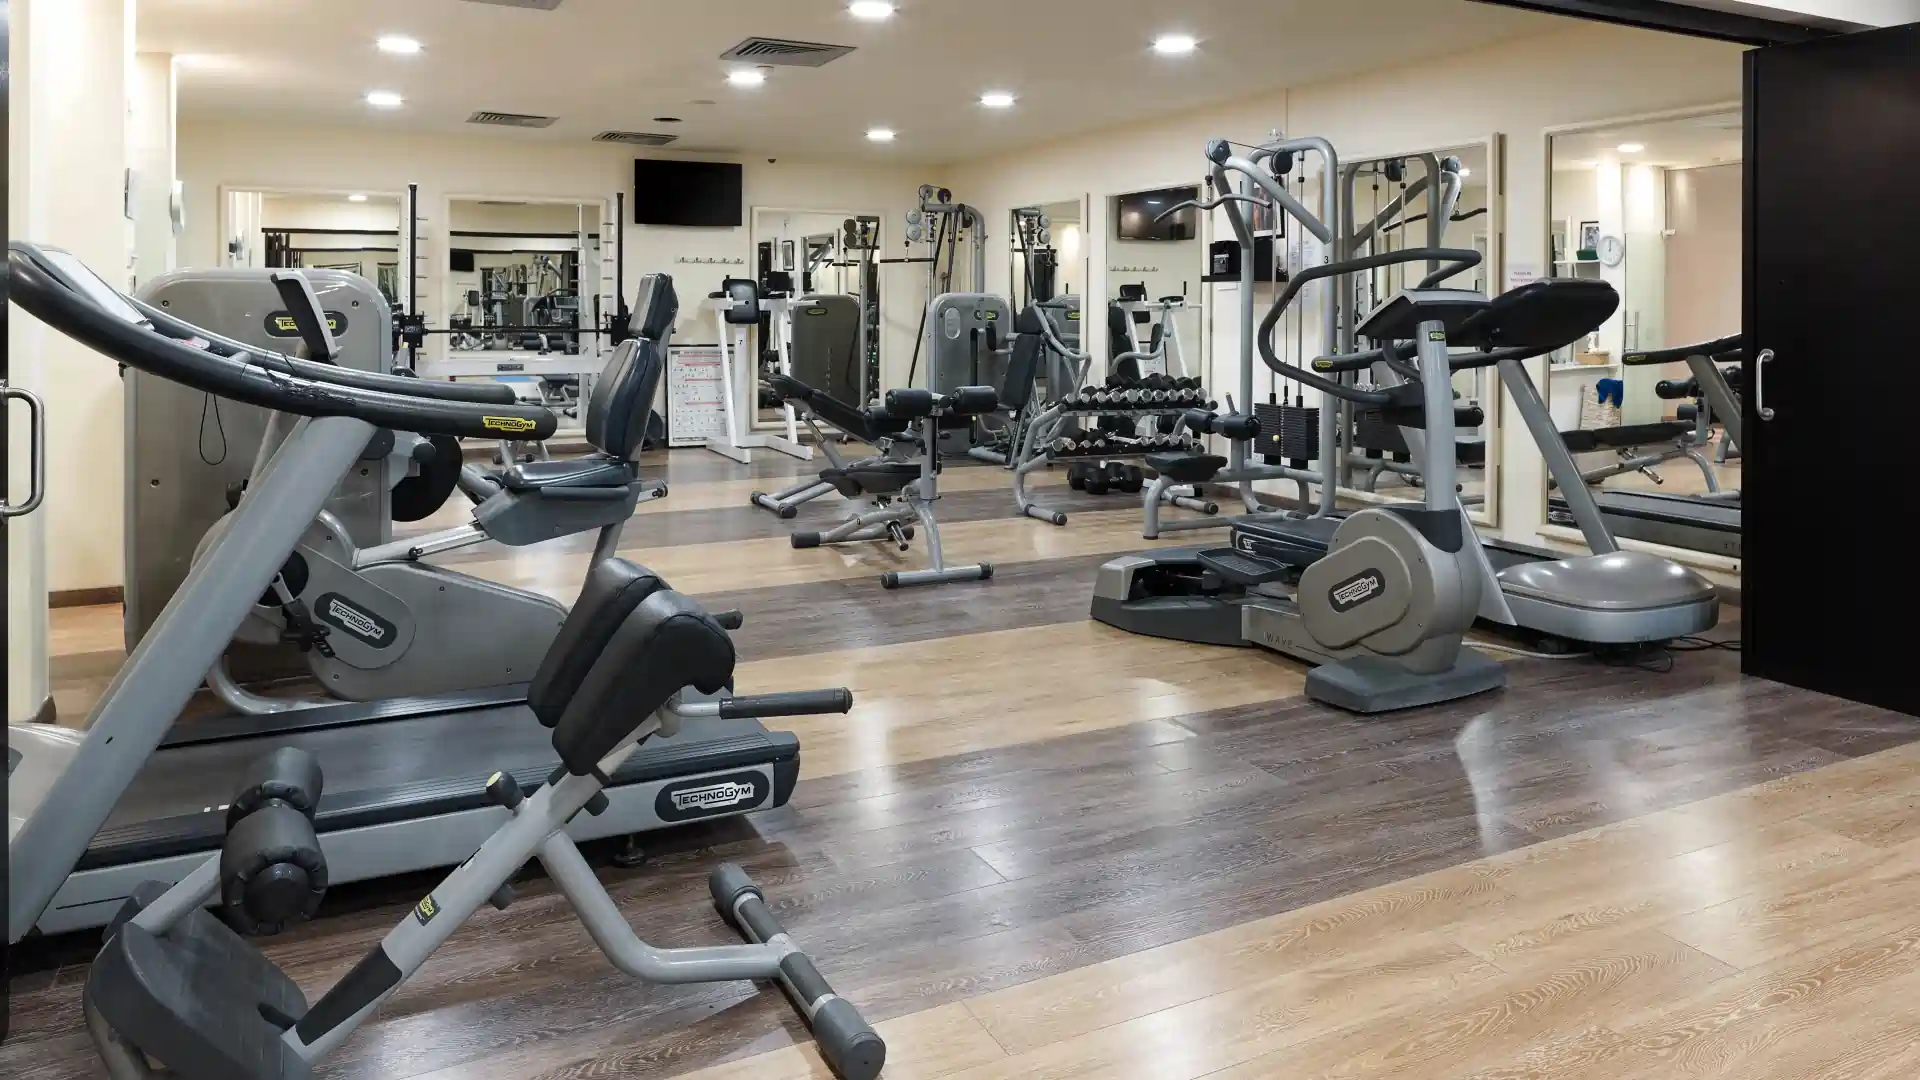 SEAFOS Luxury Resort & Spa Nafplio - Fully Equipped Gym